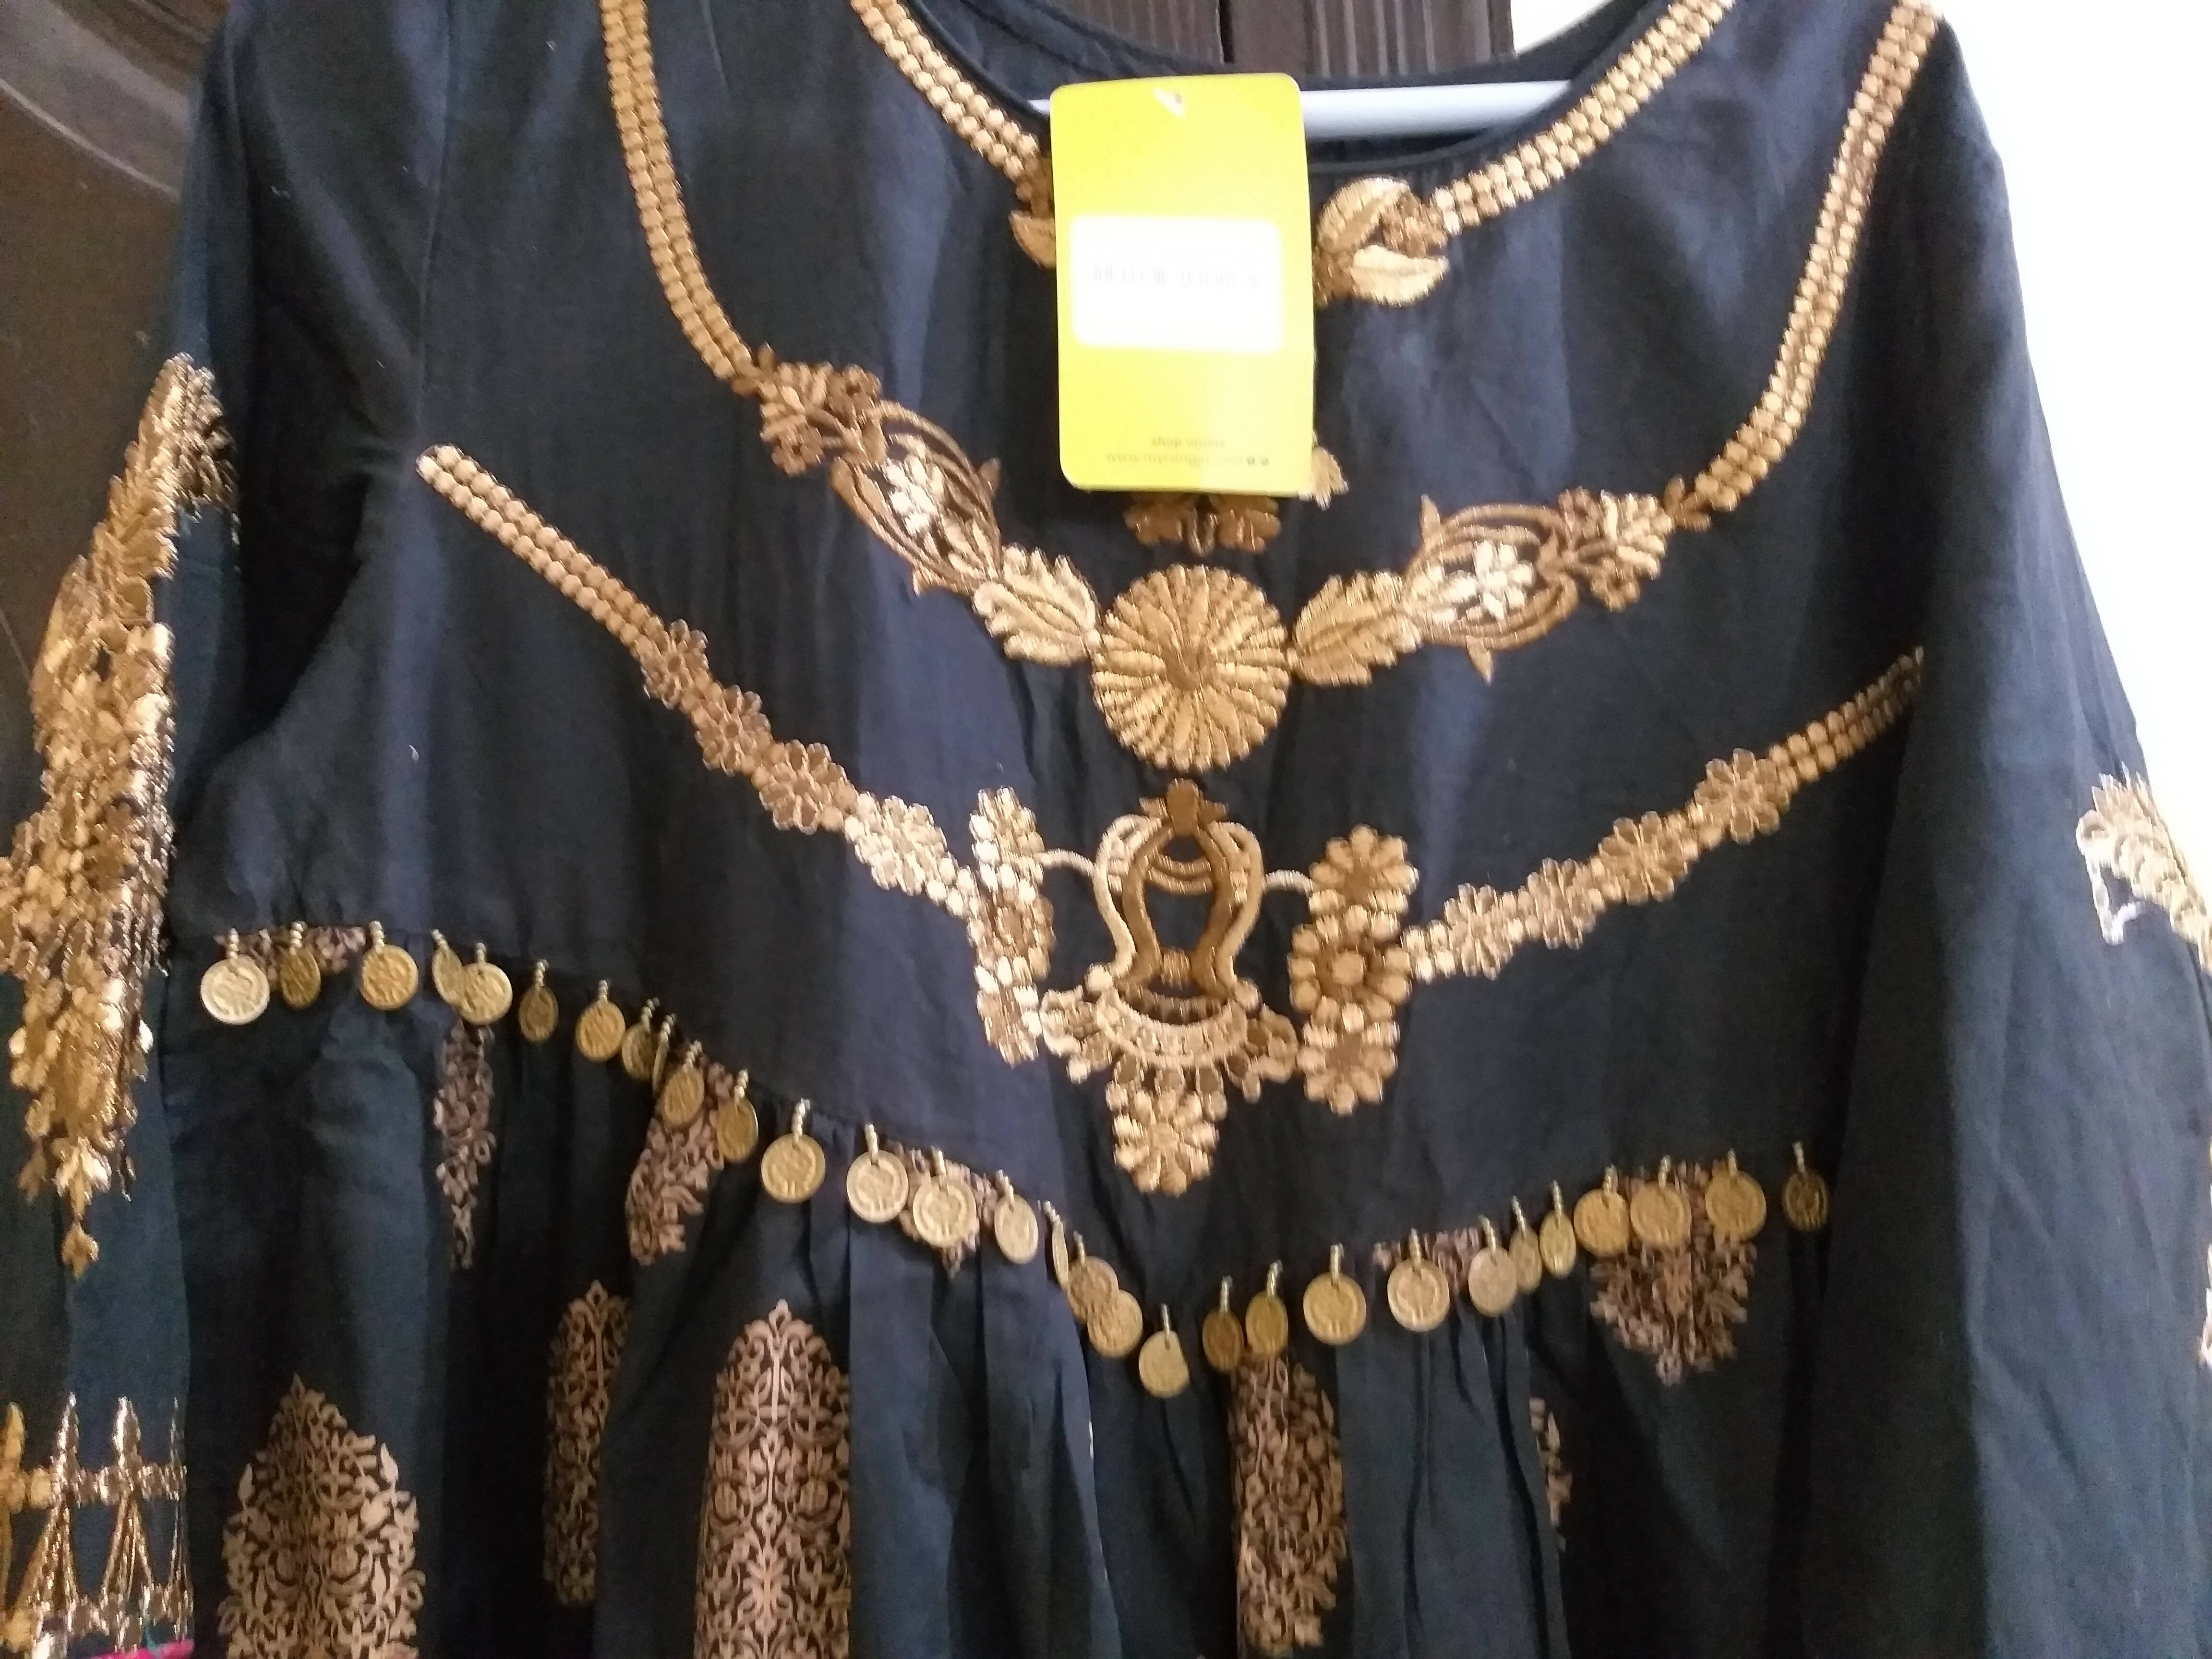 Rangja |Women Branded Frock |Size Medium | Brand New with tag